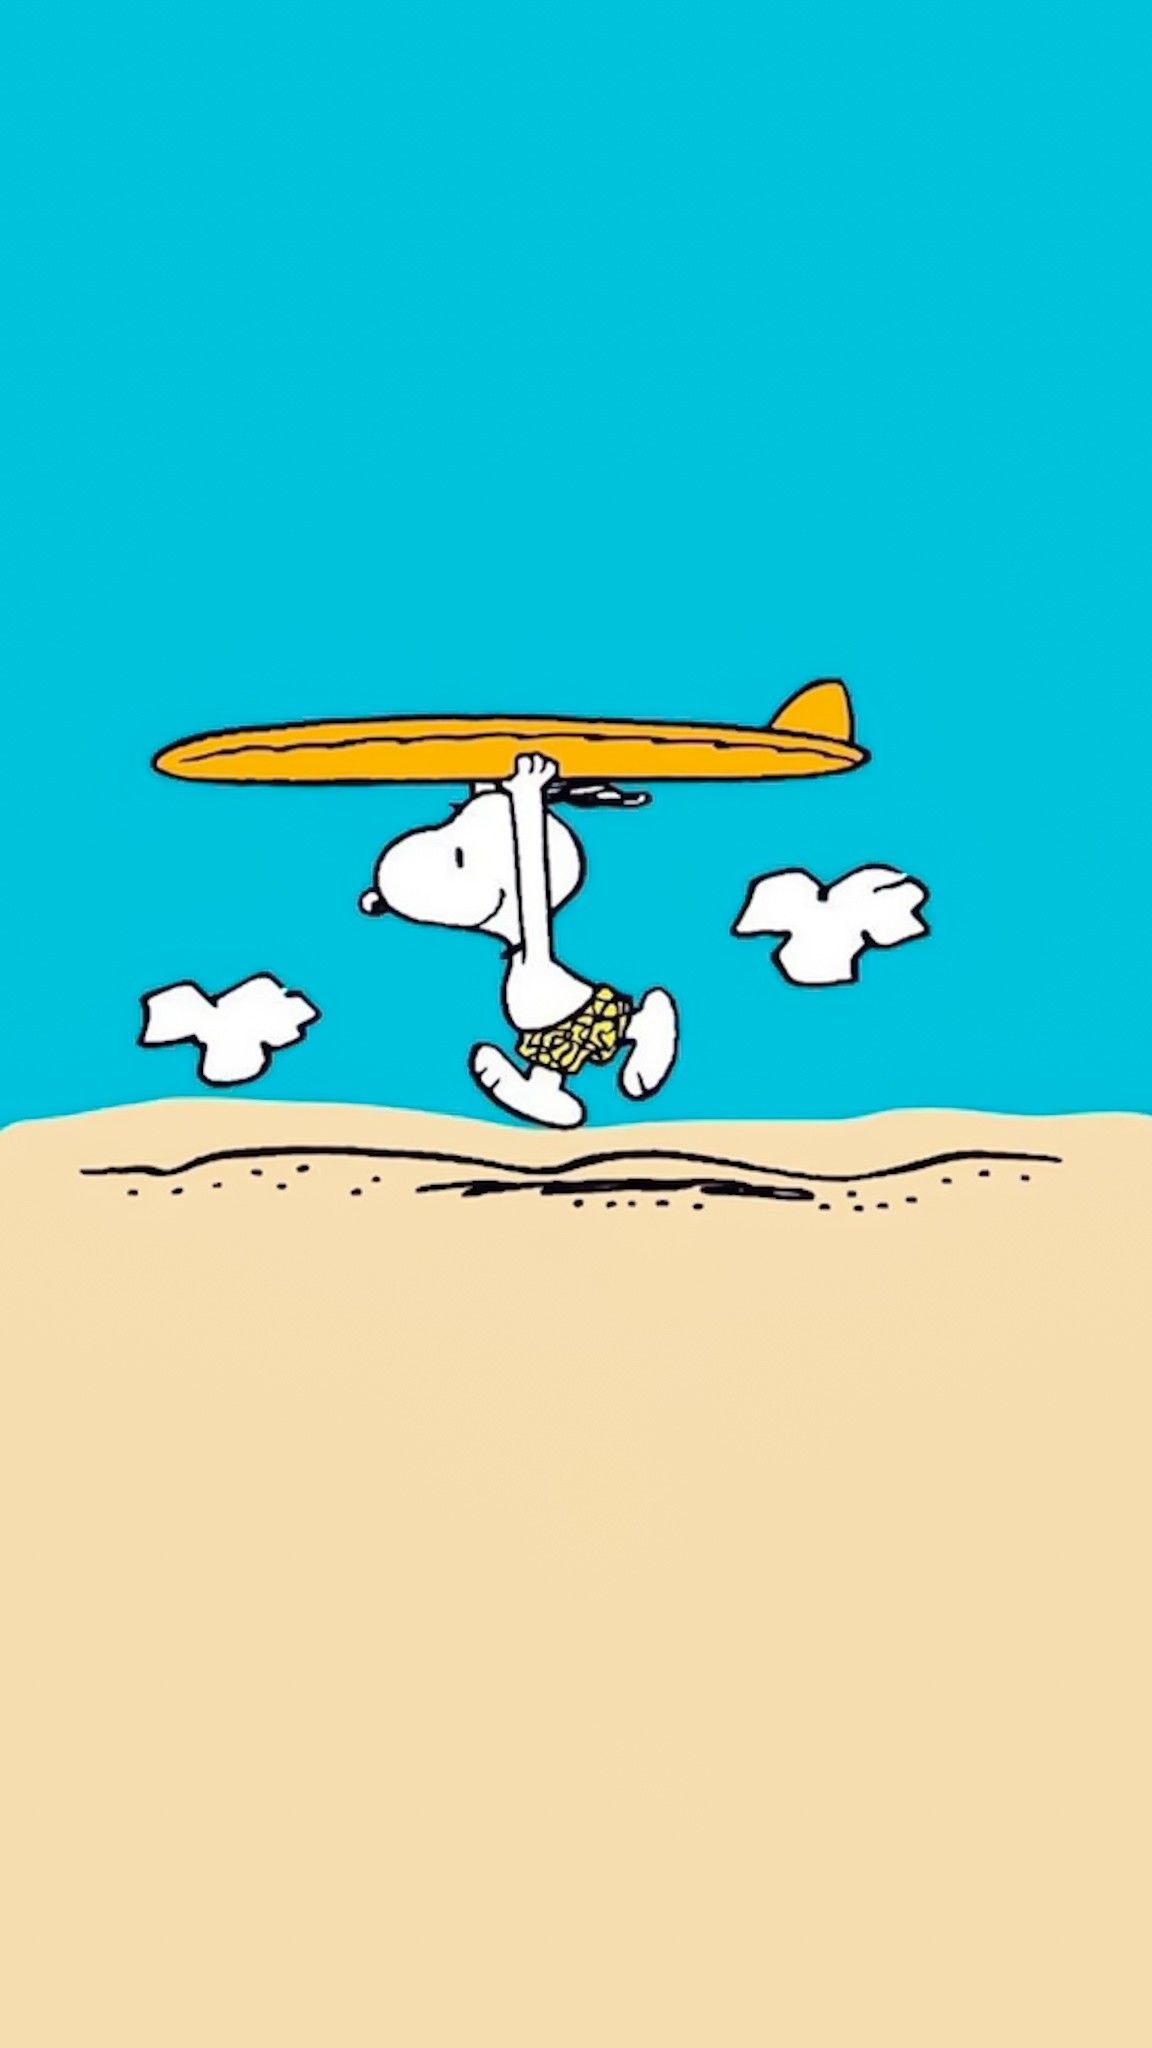 Snoopy. Snoopy wallpaper, Snoopy picture, Snoopy image